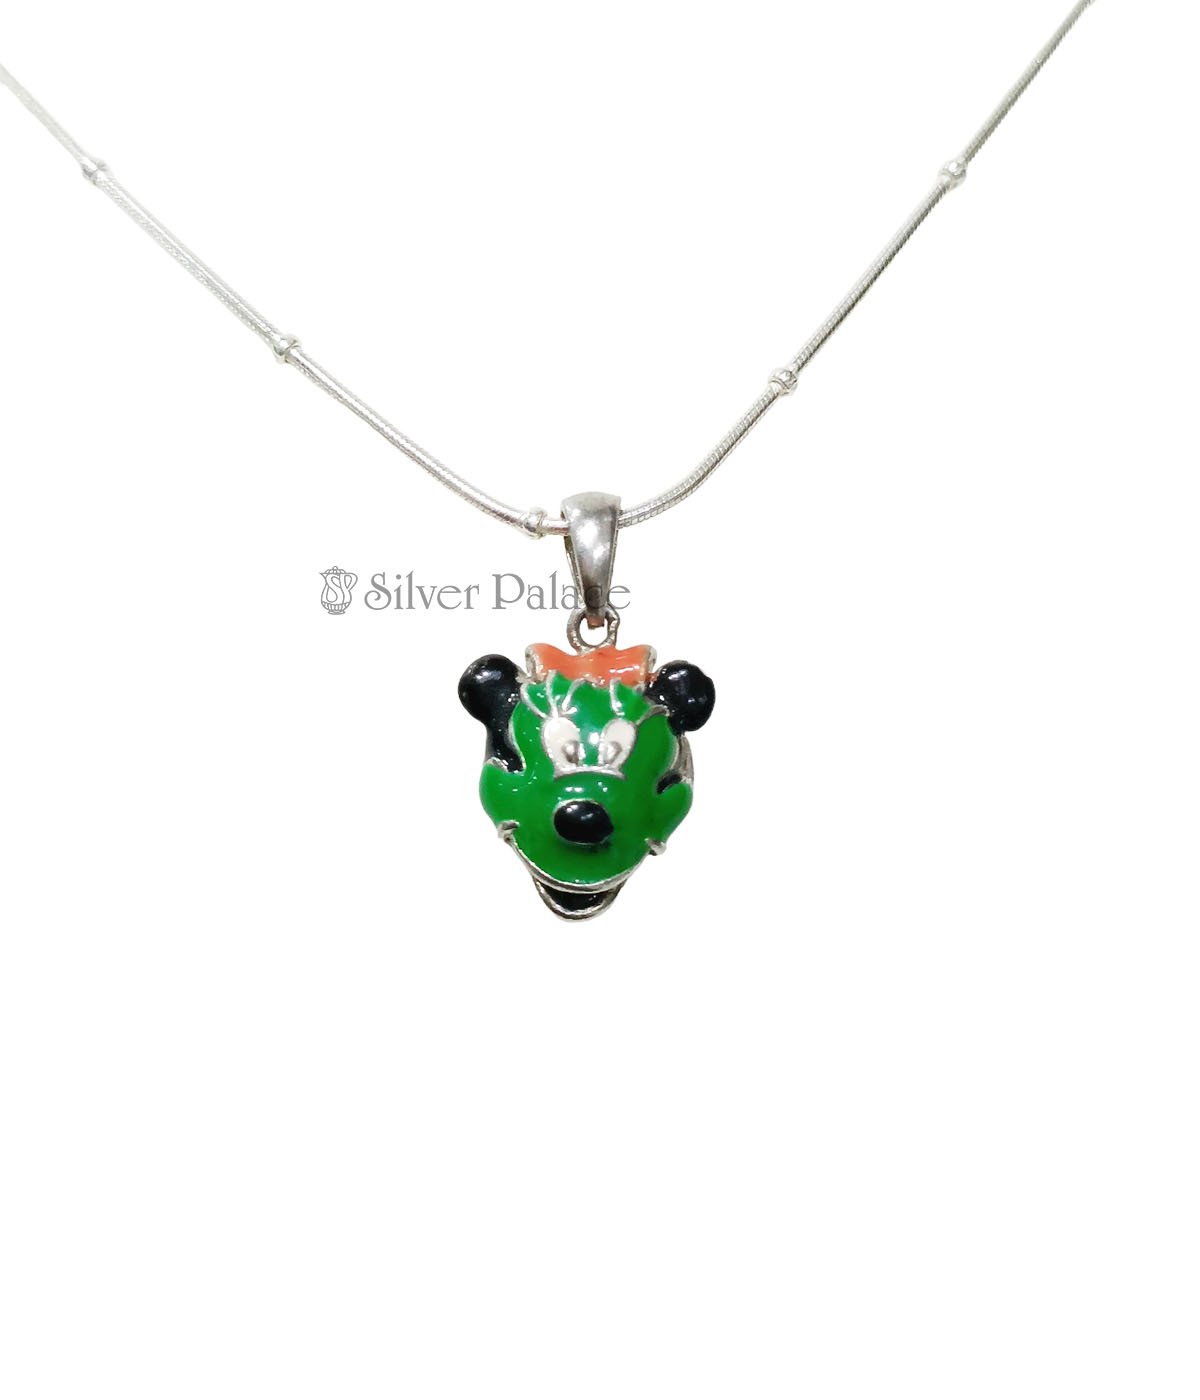 92.5 STERLING SILVER MICKEY MOUSE PENDANT CHAIN